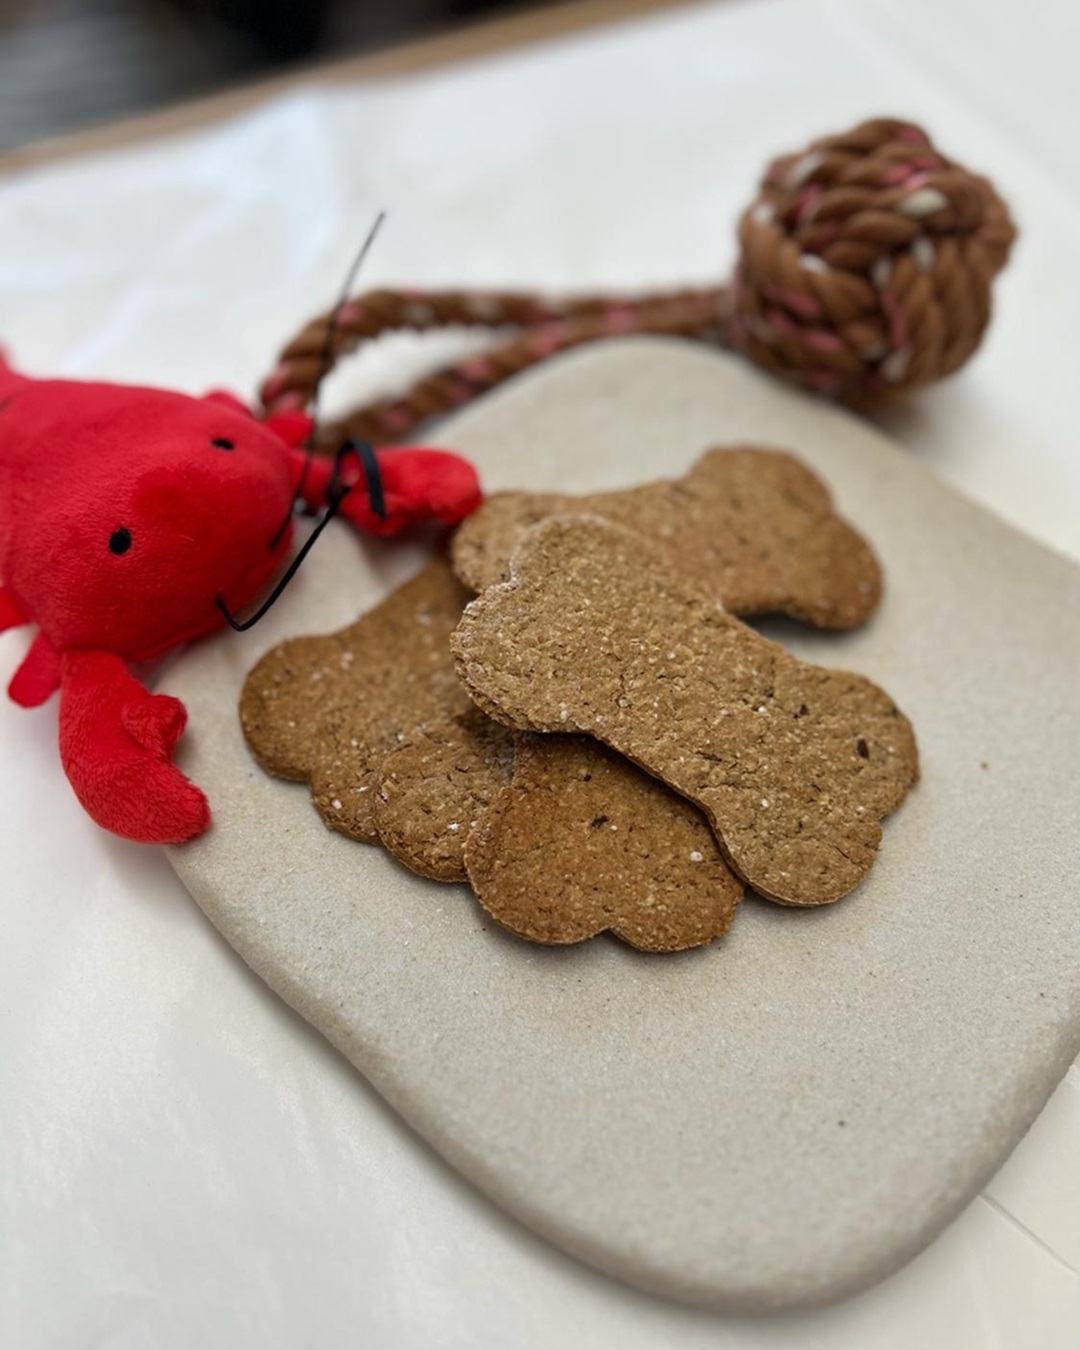 Dog biscuits on a plate with lobster